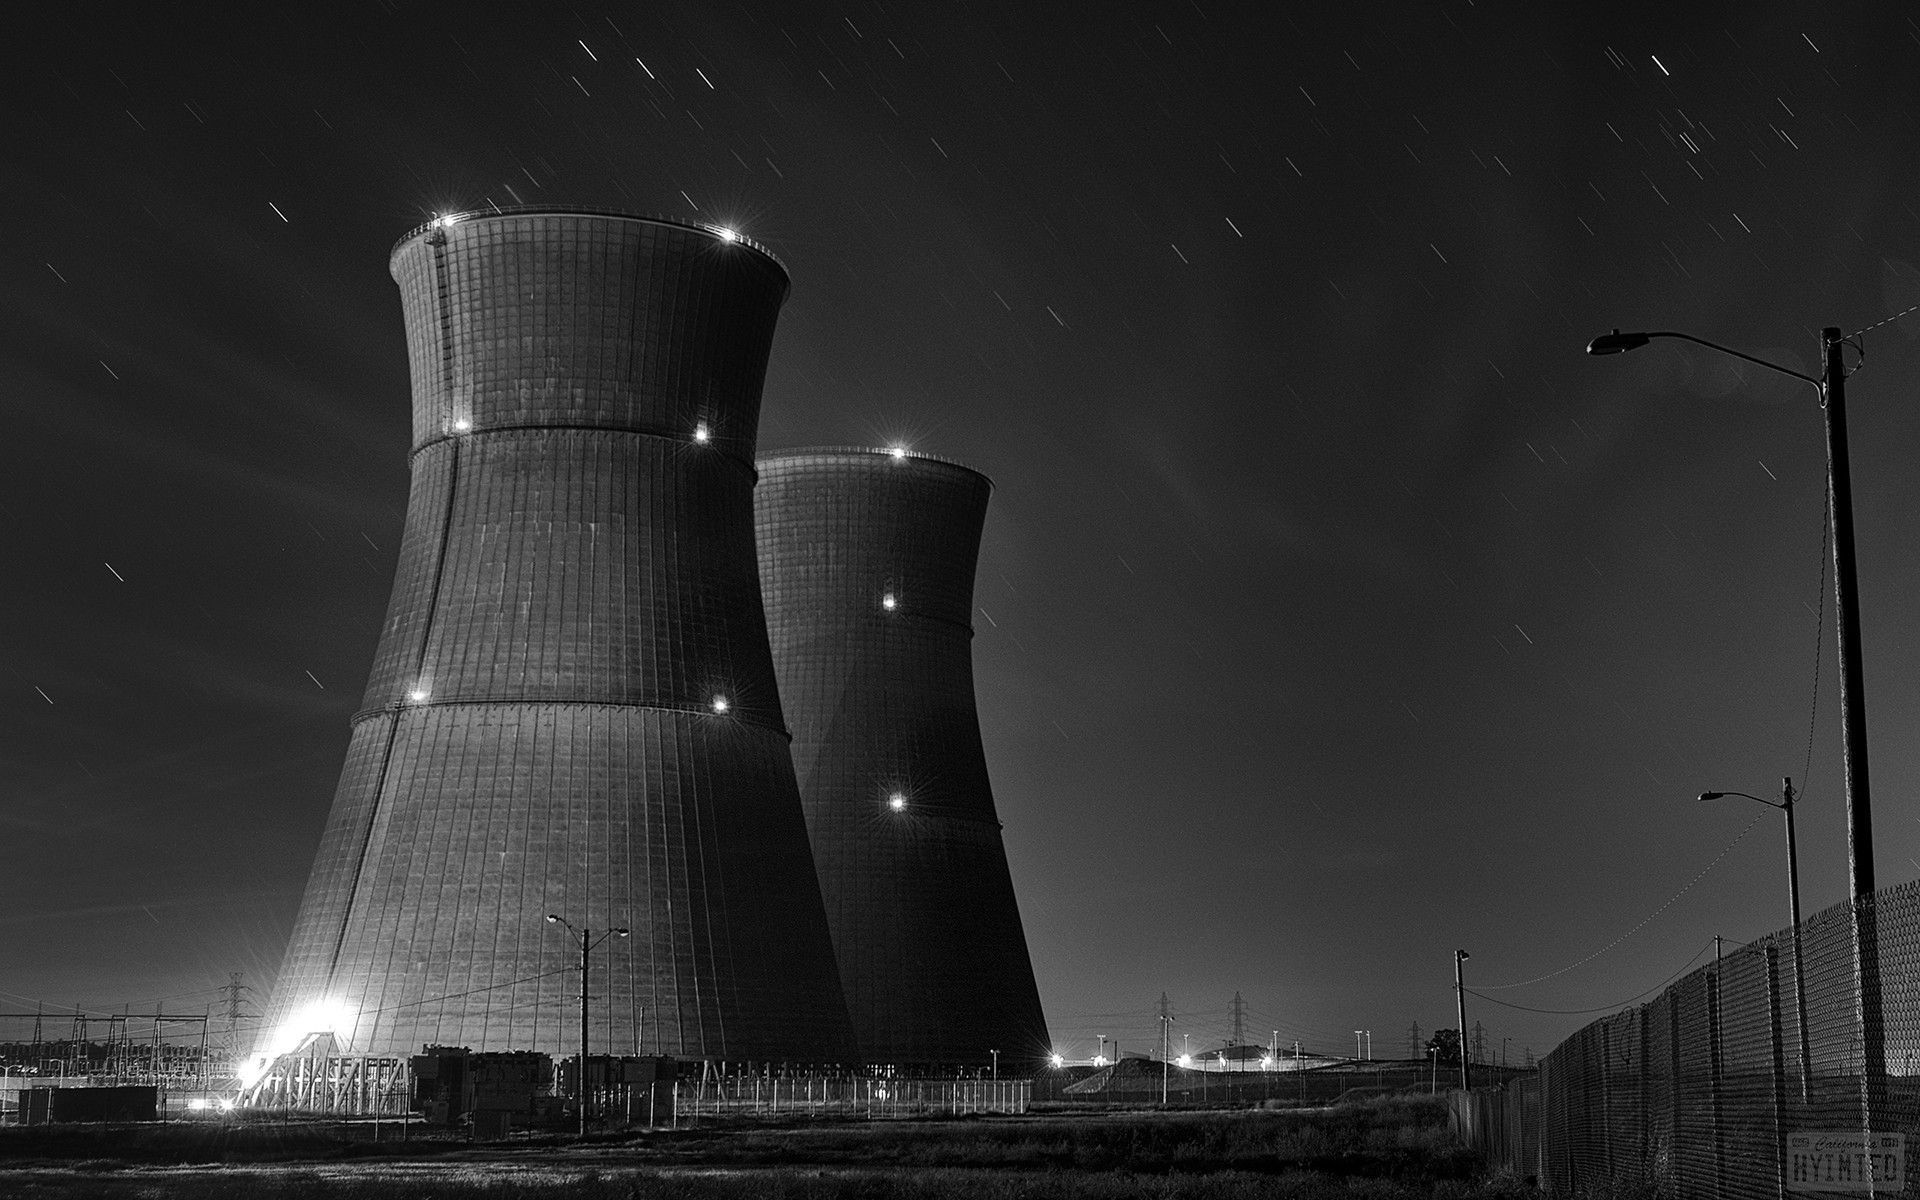 Nuclear Energy Background